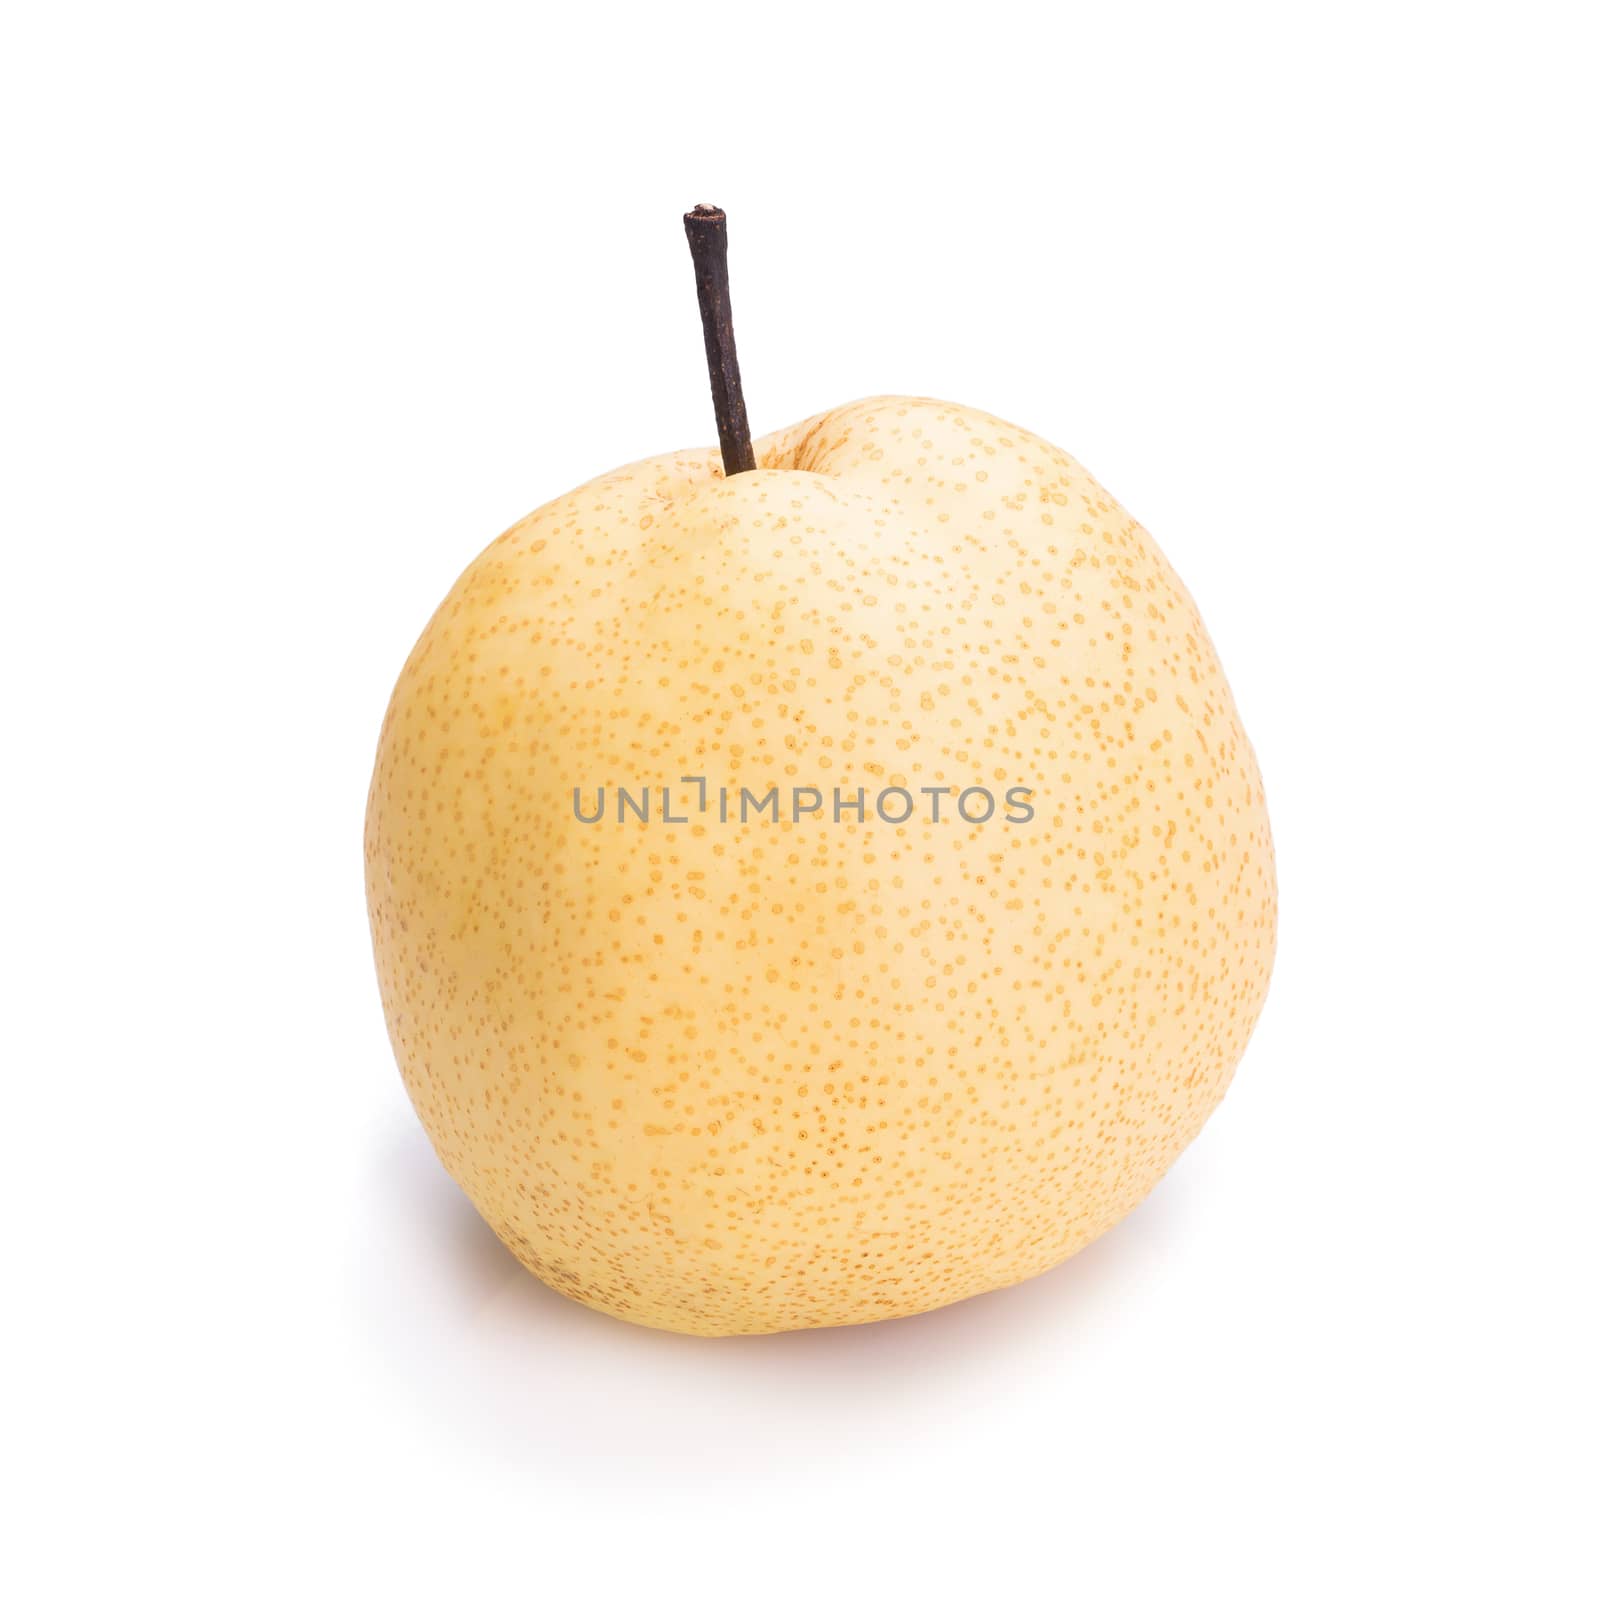 Chinese pear fruits on white background.